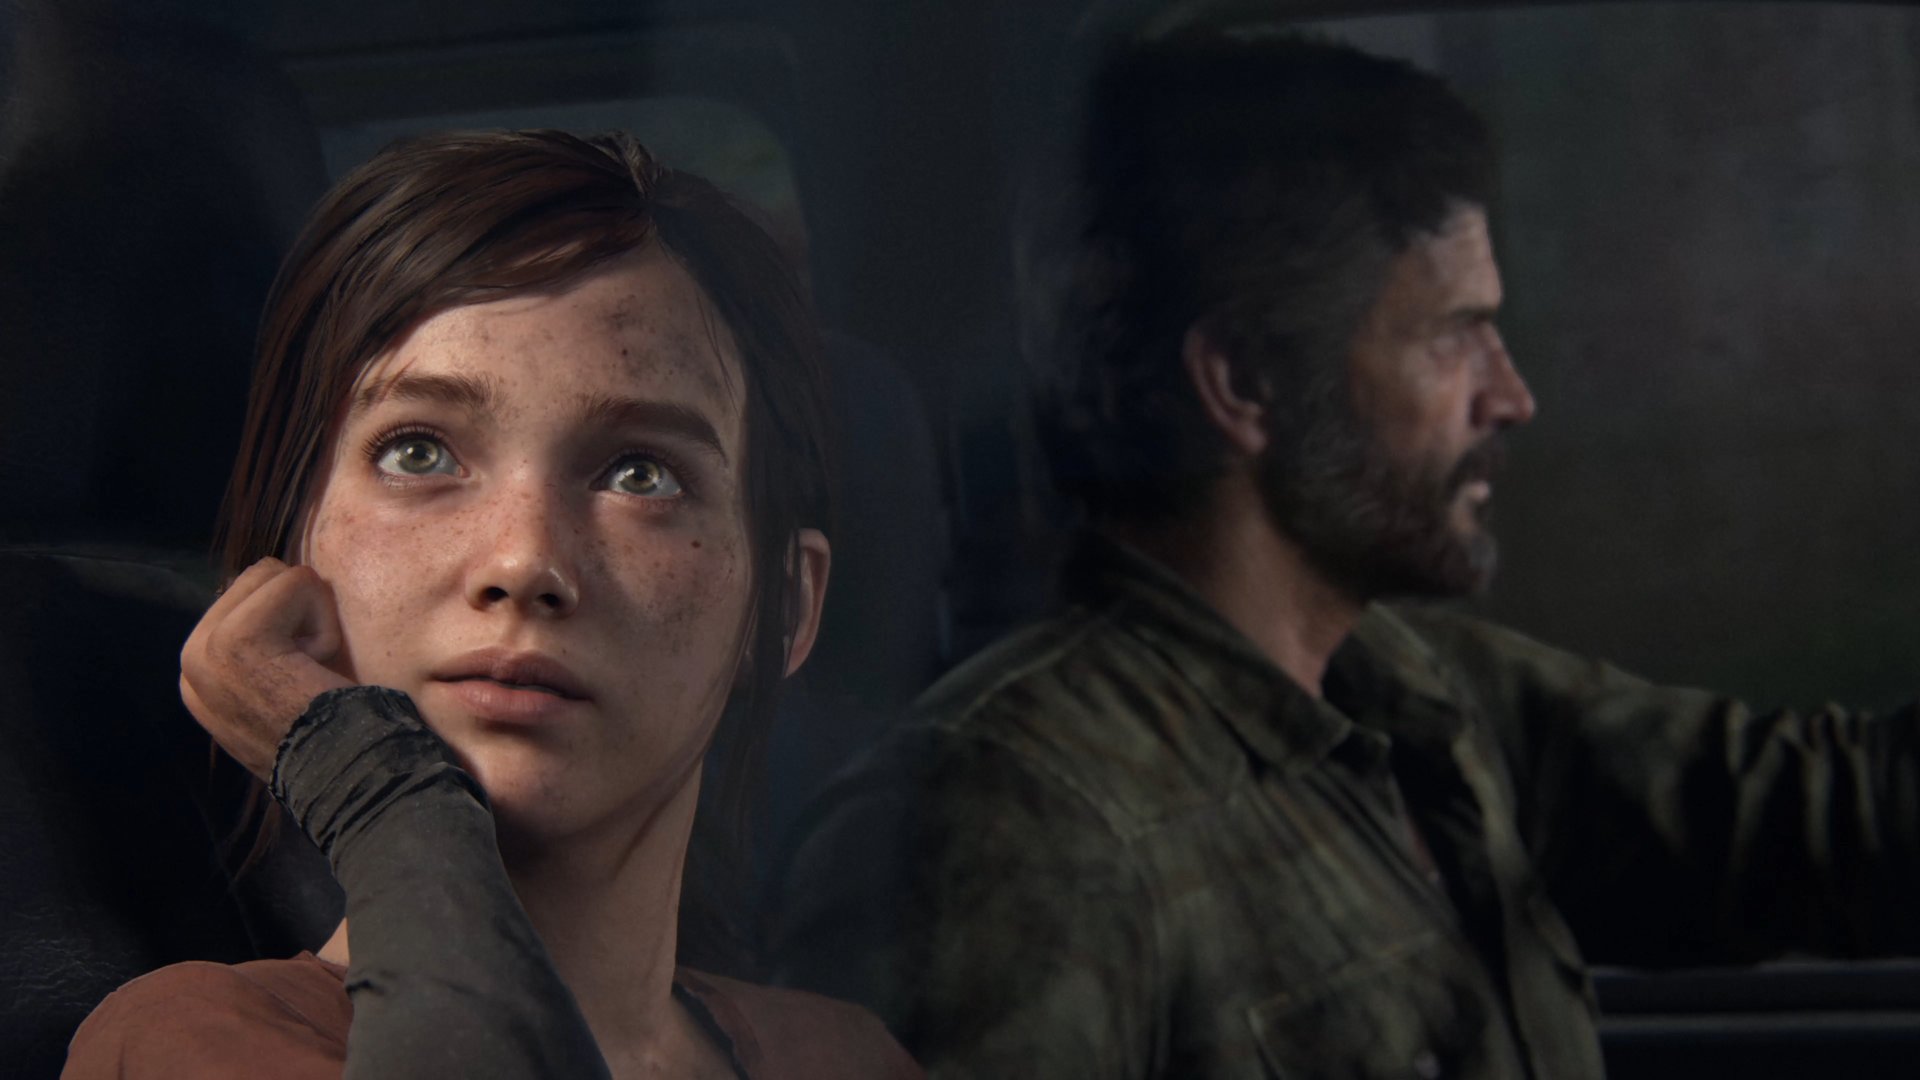 The Making Of, The Last Of Us